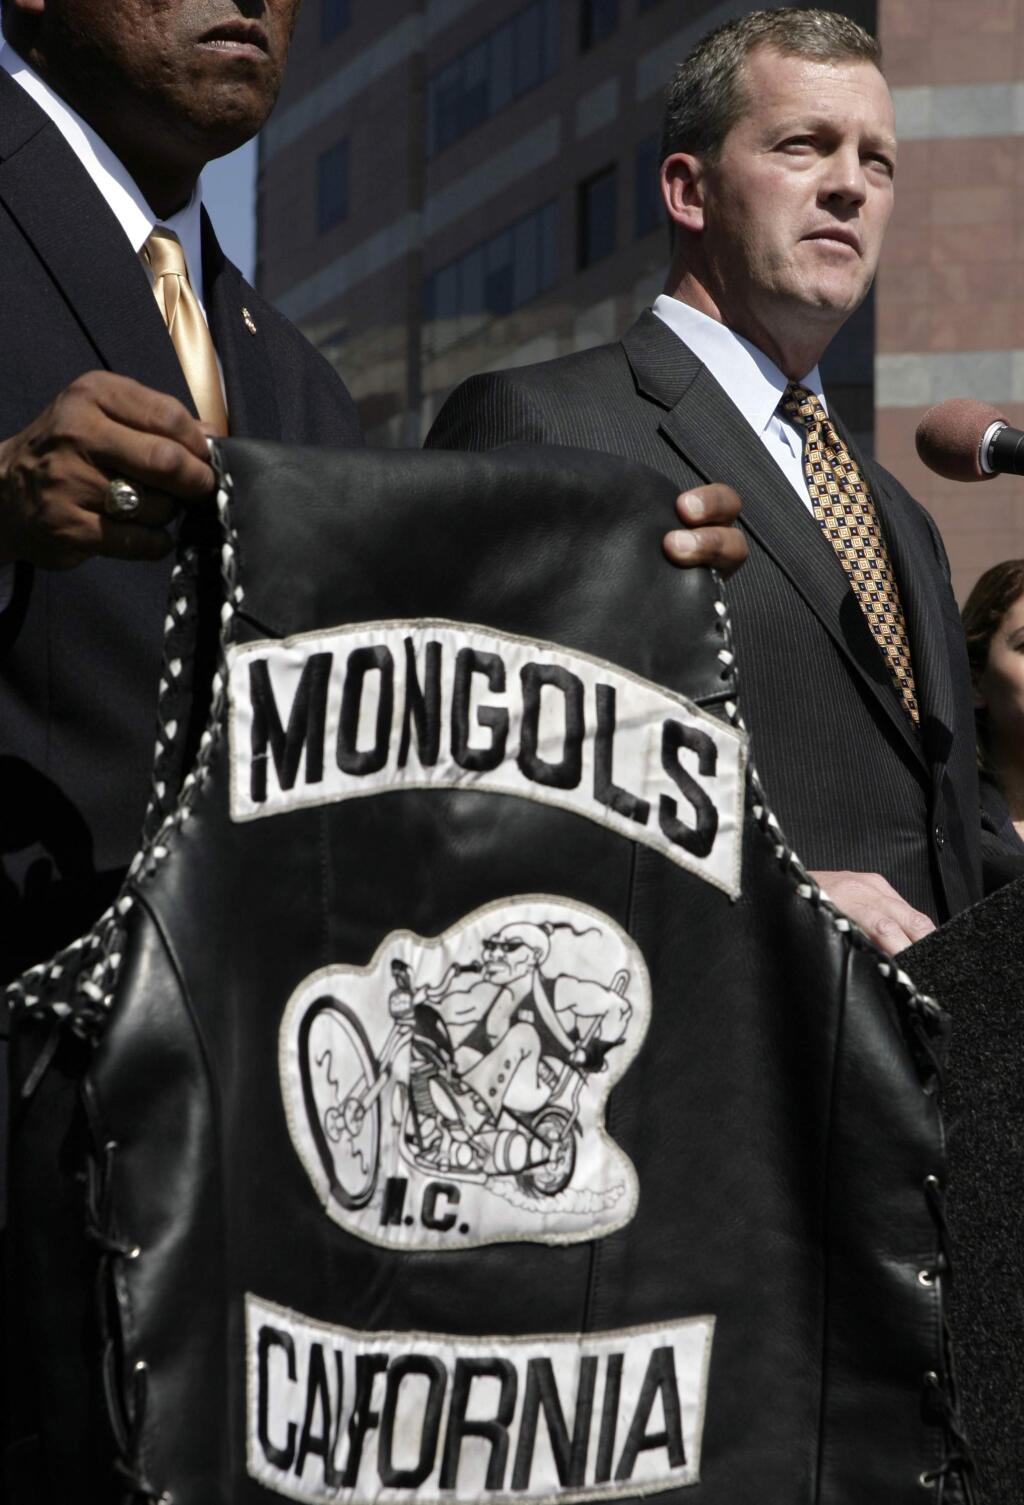 FILE - In this Tuesday, Oct. 21, 2008 file photo, U.S. Attorney Thomas P. O'Brien, right, speaks during a news conference in Los Angeles about the arrest of several Mongol motorcycle gang members in six states as a vest with the Mongols logo displayed. Federal prosecutors say a California jury has decided the Mongols motorcycle gang should be stripped of its trademarked logo. Jurors in U.S. District Court in Santa Ana on Friday, Jan. 11, 2018, found that the government could seize control of the group's trademark. The jury previously found the Mongol Nation, the entity that owns the image of a Mongol warrior on a chopper, guilty of racketeering and conspiracy. (AP Photo/Ric Francis, File)